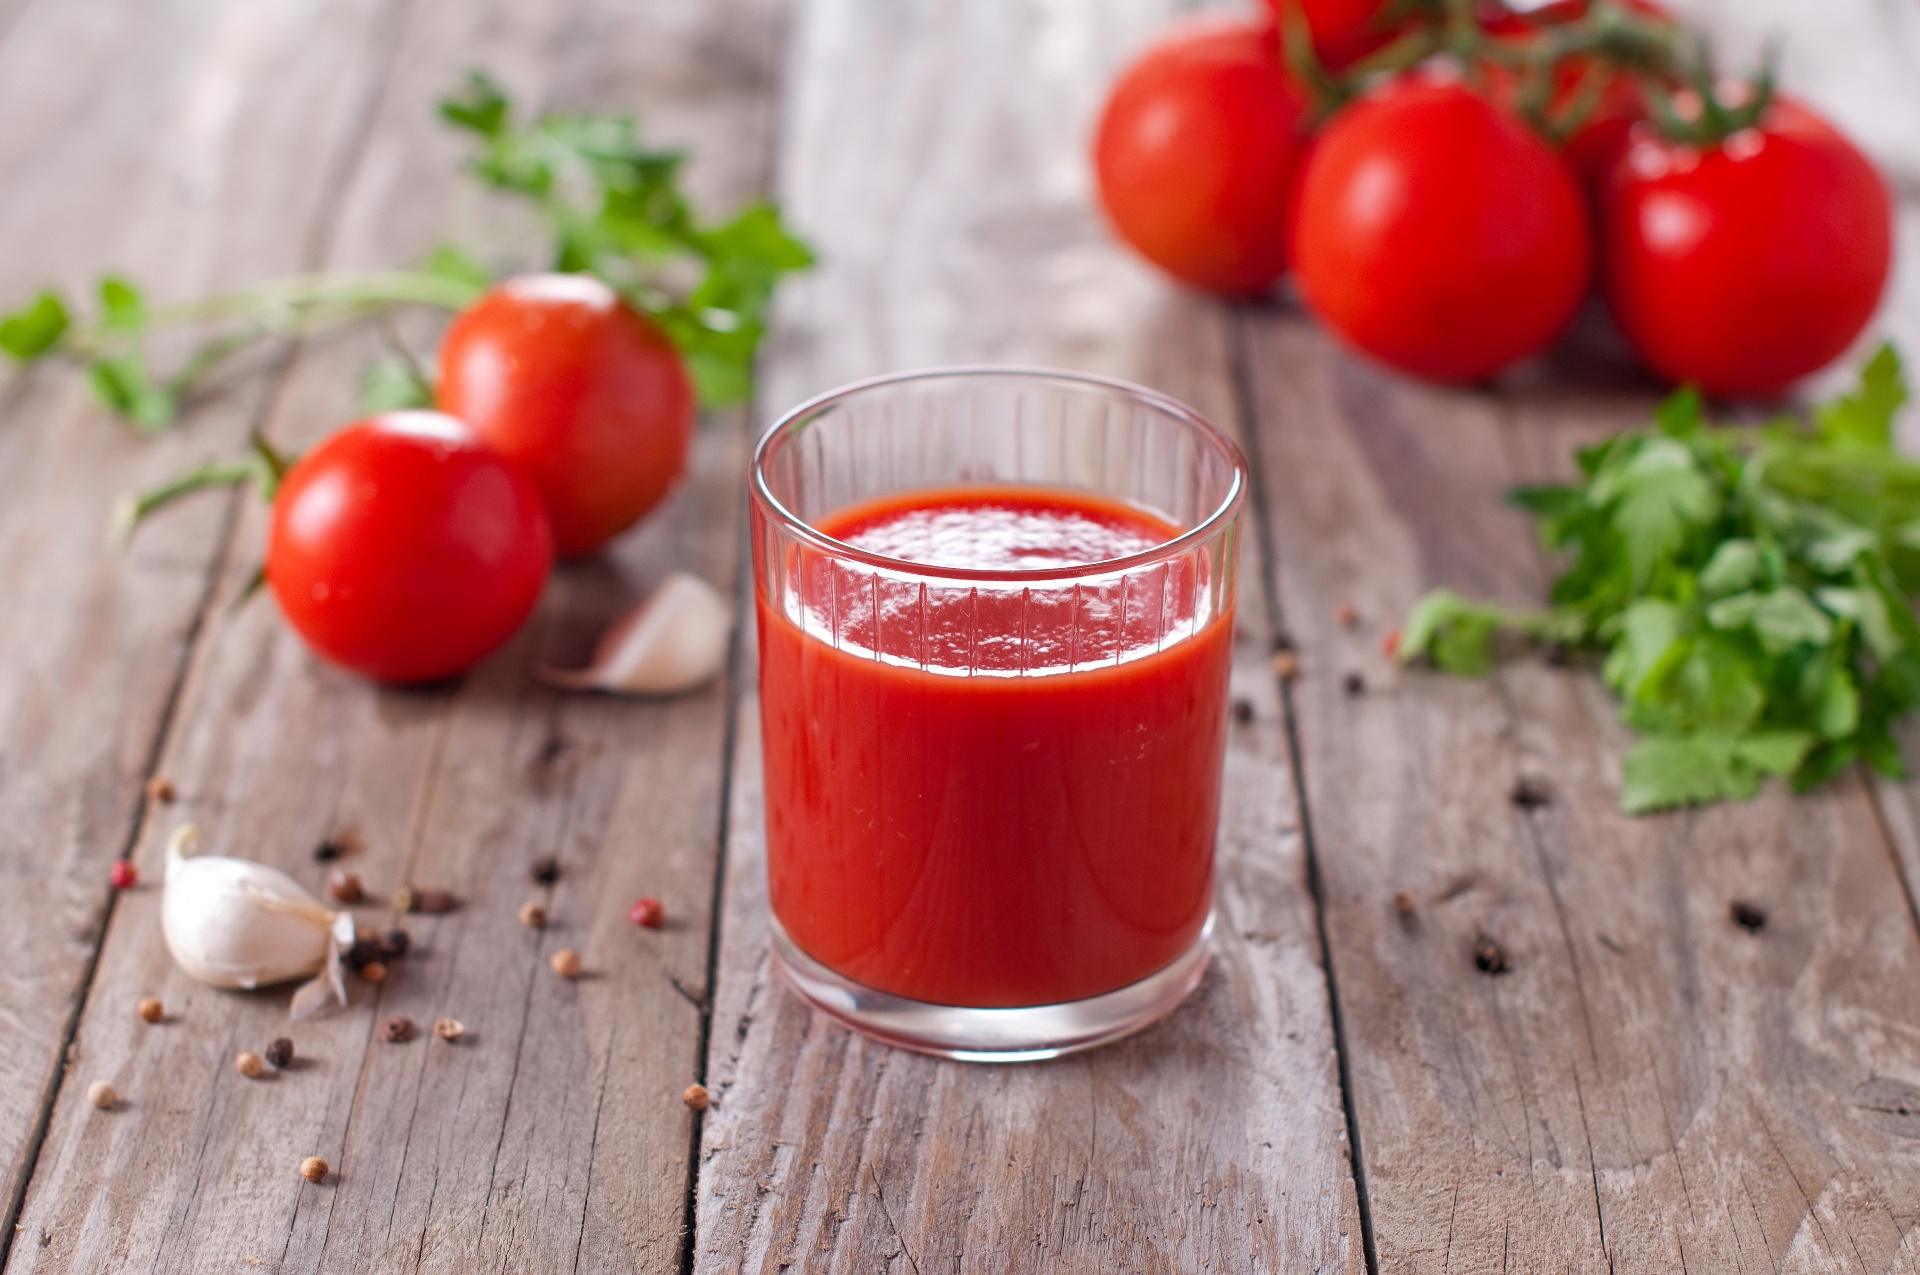 General 1920x1275 tomatoes drinking glass food juice garlic black pepper leaves closeup depth of field wooden surface wood